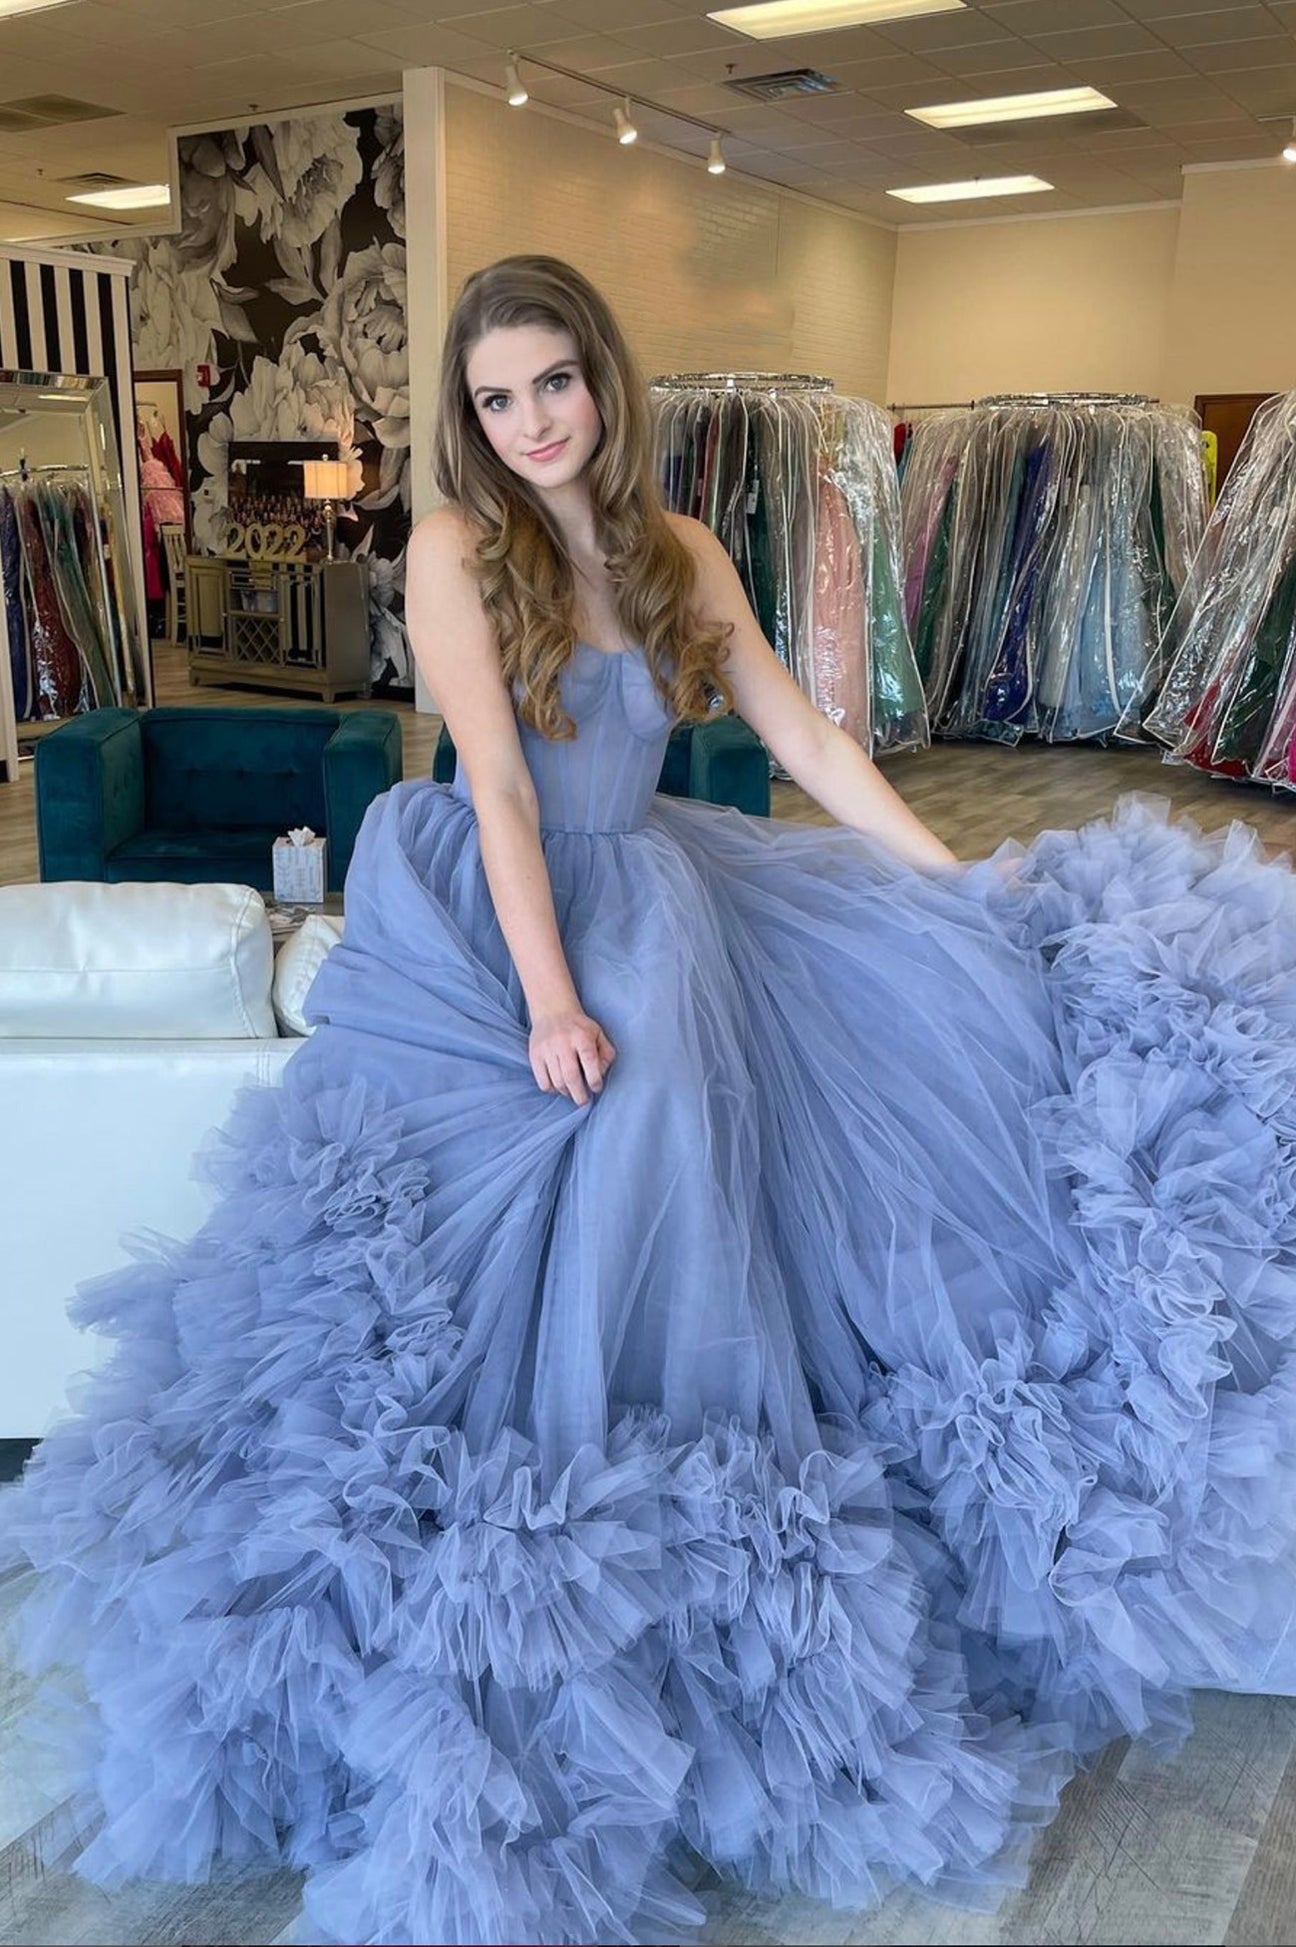 Strapless Quinceanera Long A-line Prom Dresses, 2022, Ball Gown 2022 Wedding Dresses, 2022 Long Prom Dresses